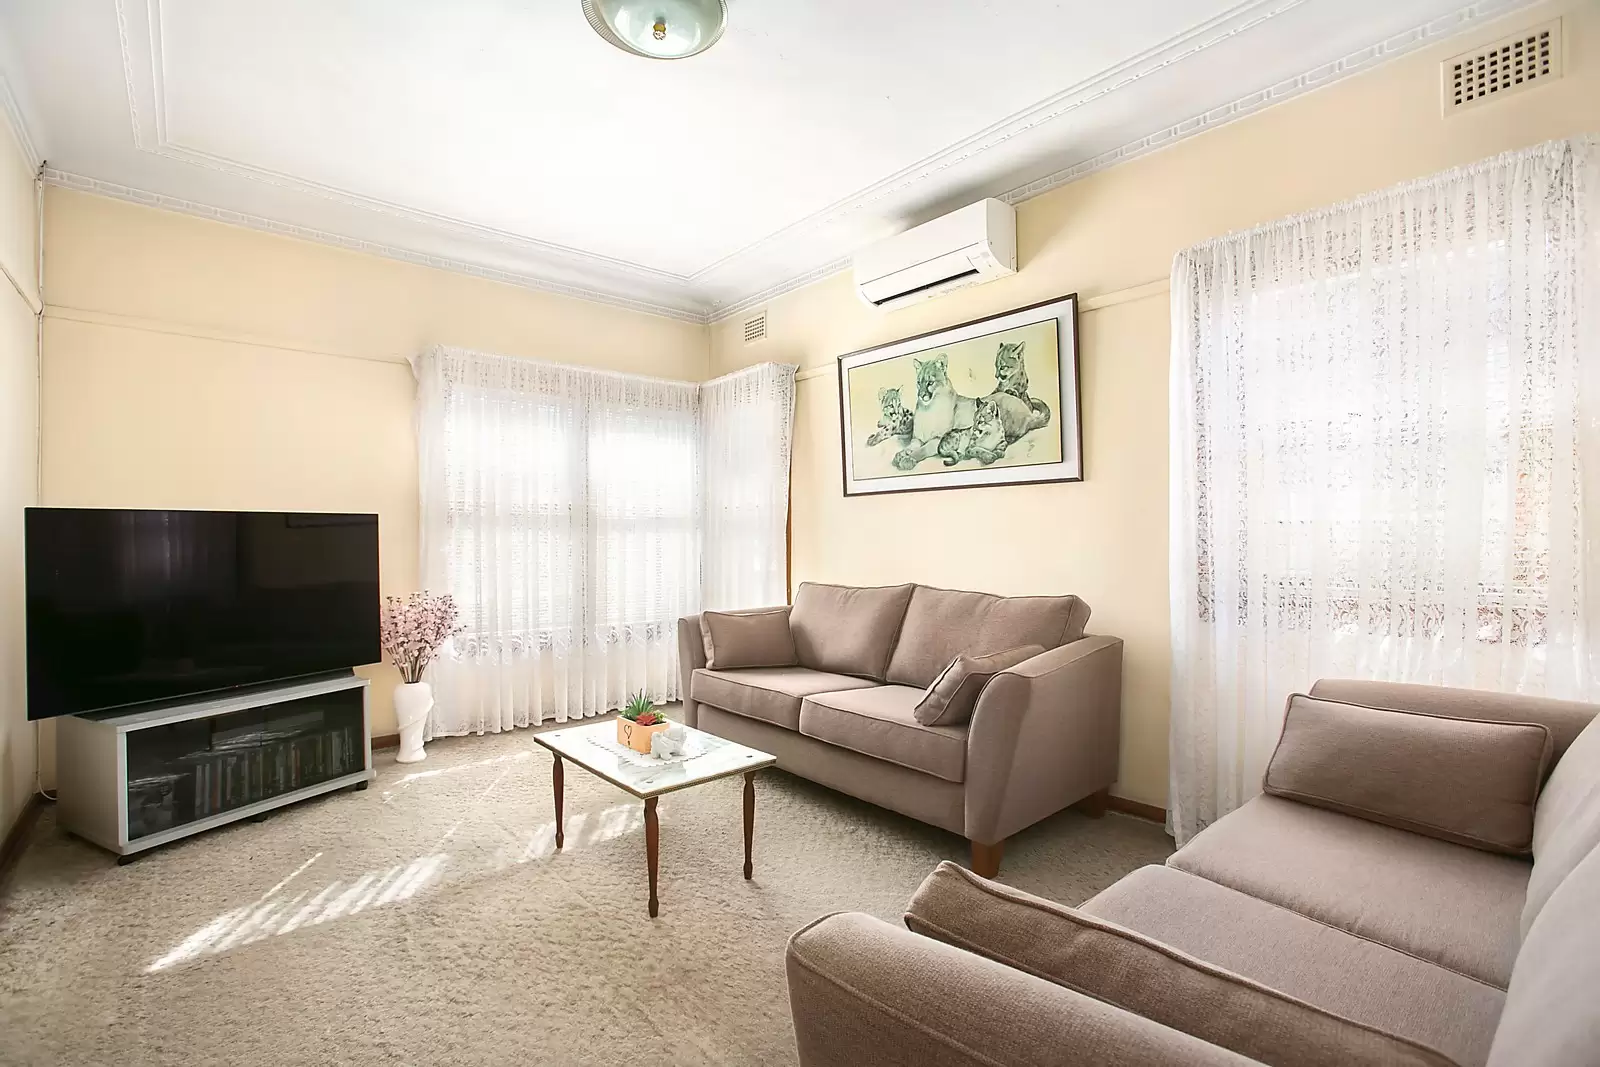 Photo #3: 80 Page Street, Pagewood - Sold by Sydney Sotheby's International Realty